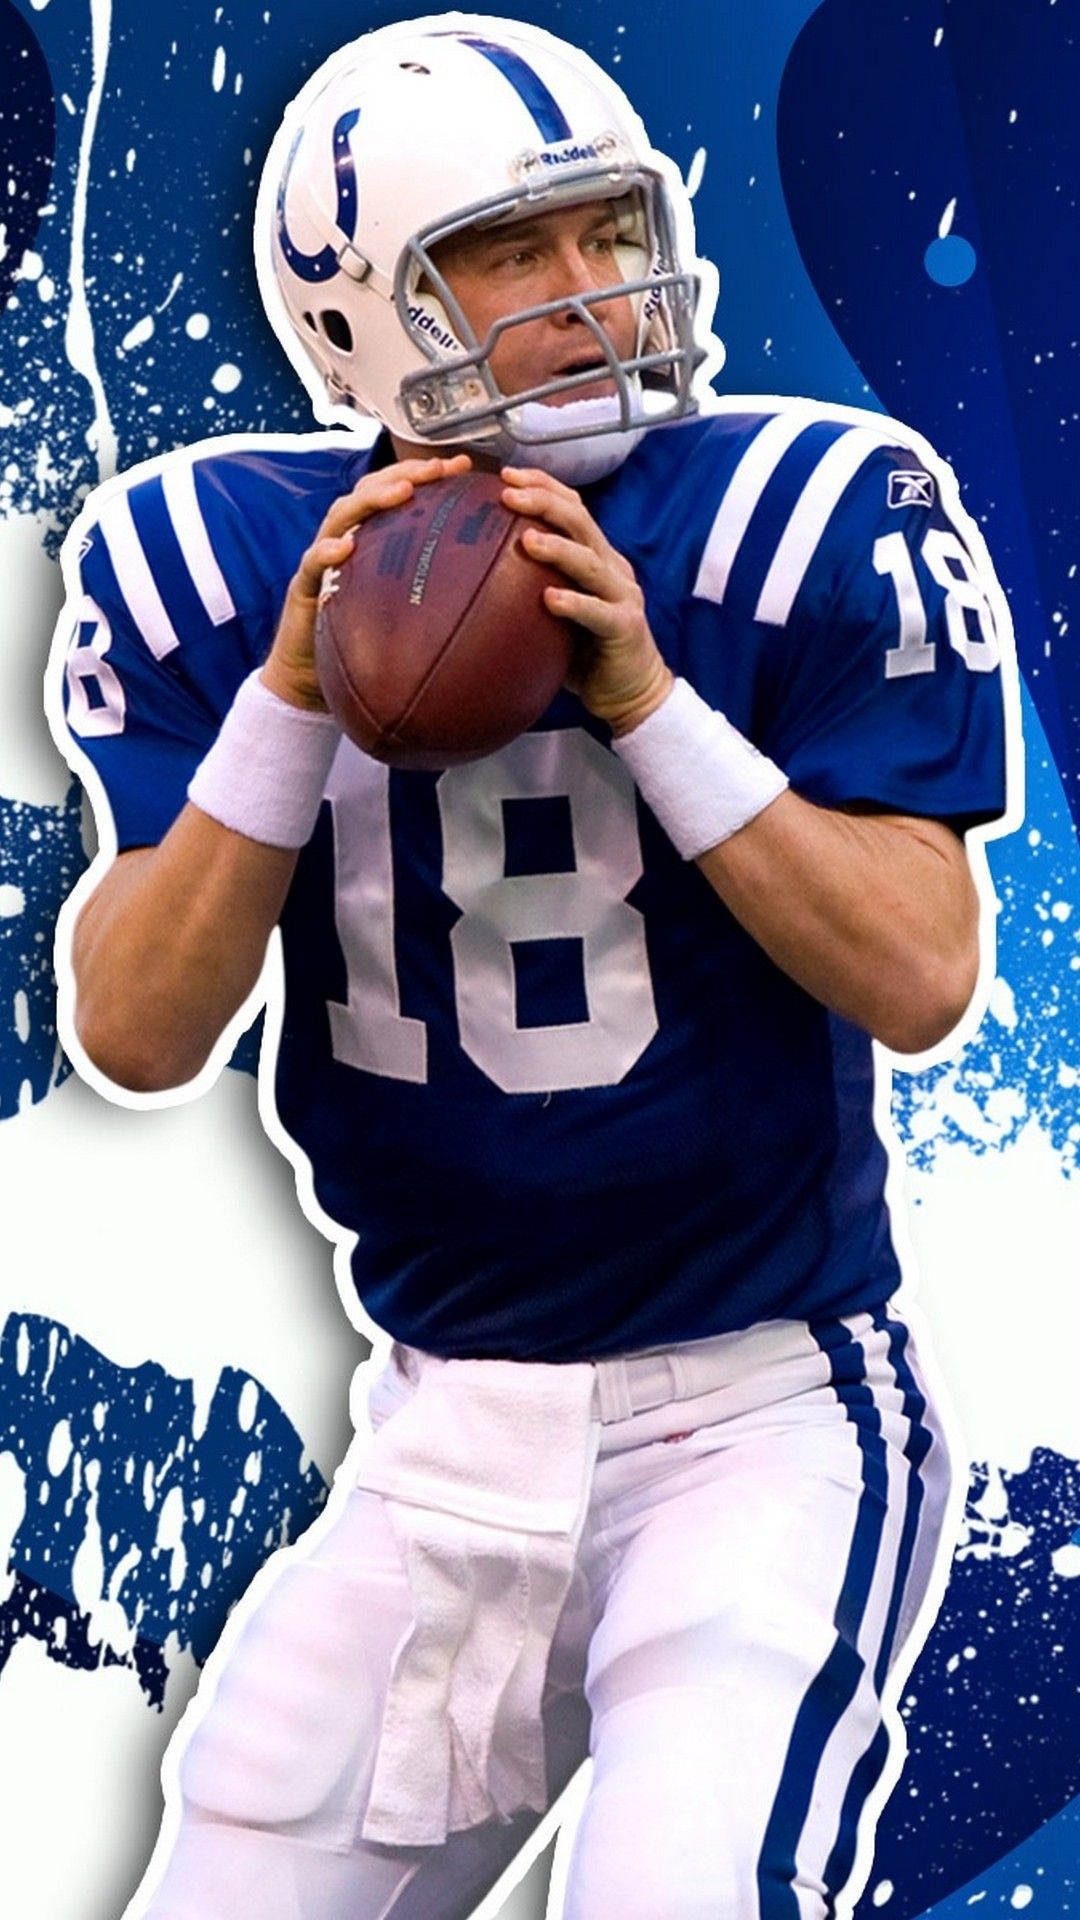 HD wallpaper, Indianapolis Colts, Peyton Manning, 1080X1920 Full Hd Phone, Hd Wallpaper, Phone Full Hd Indianapolis Colts Background, Nfl Football